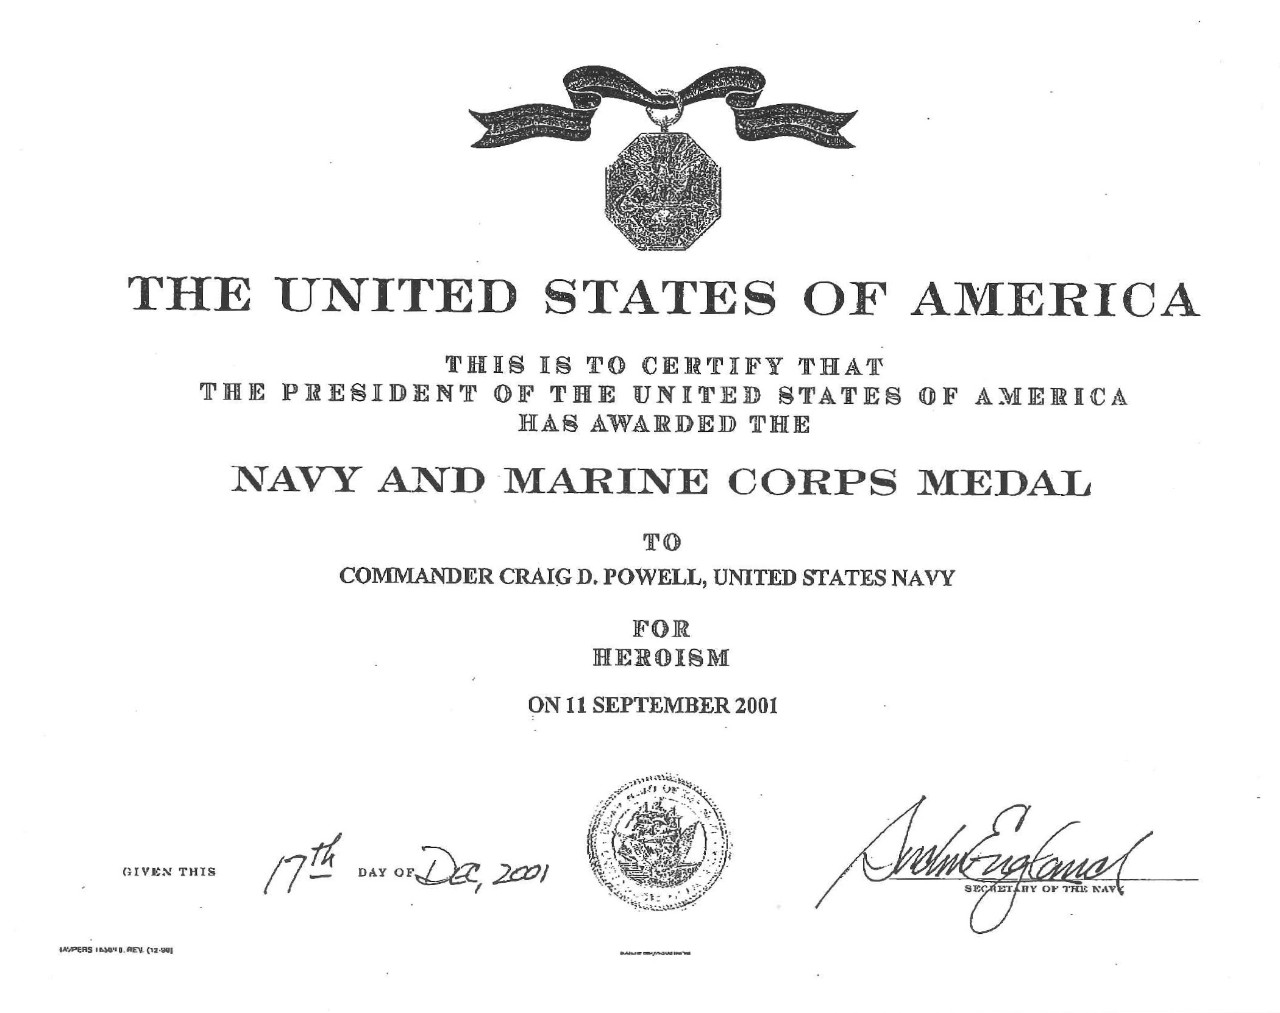 Powell, Craig CDR Navy and Marine Corps Medal